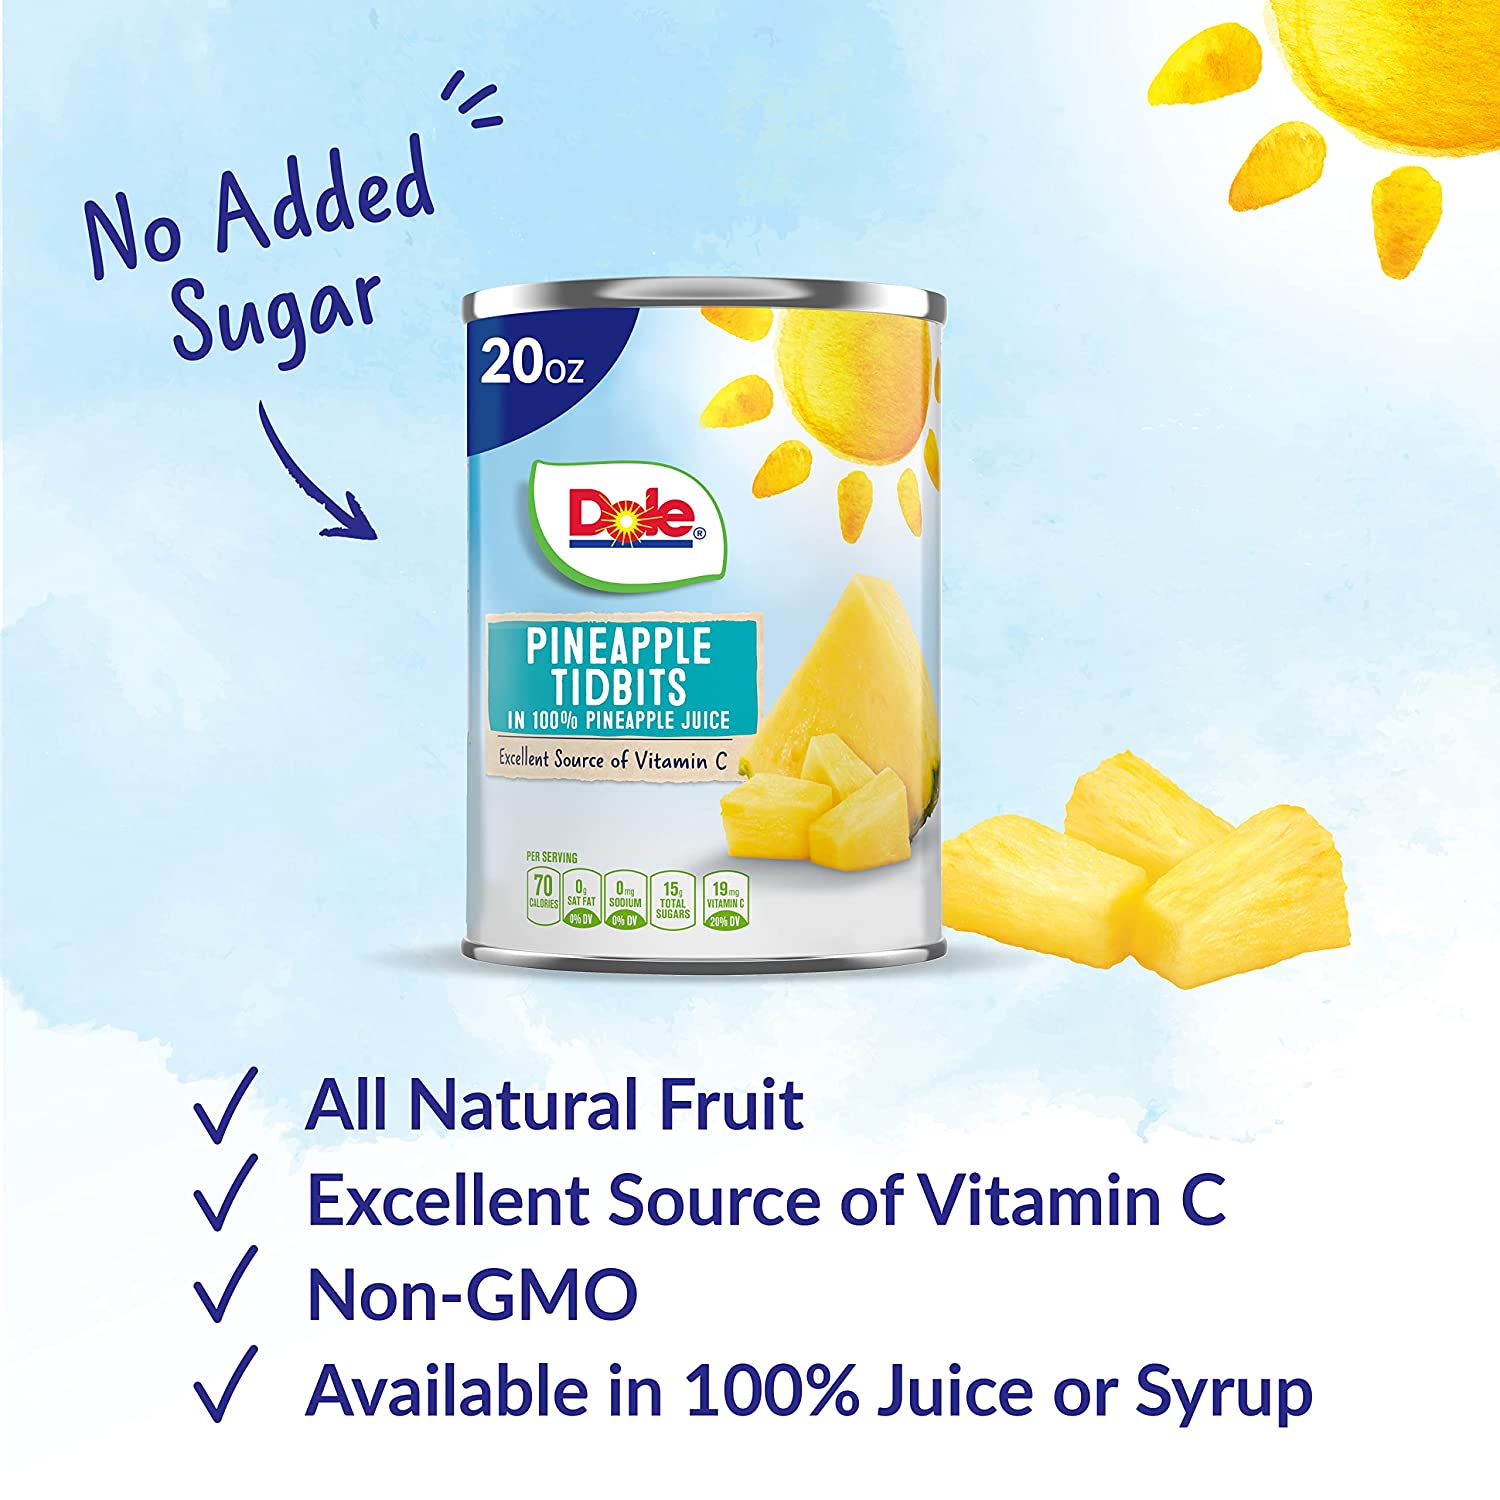 Dole Canned Fruit, Pineapple Tidbits in 100% Pineapple Juice*, Gluten Free, Pantry Staples, 20 Oz, 12 Count